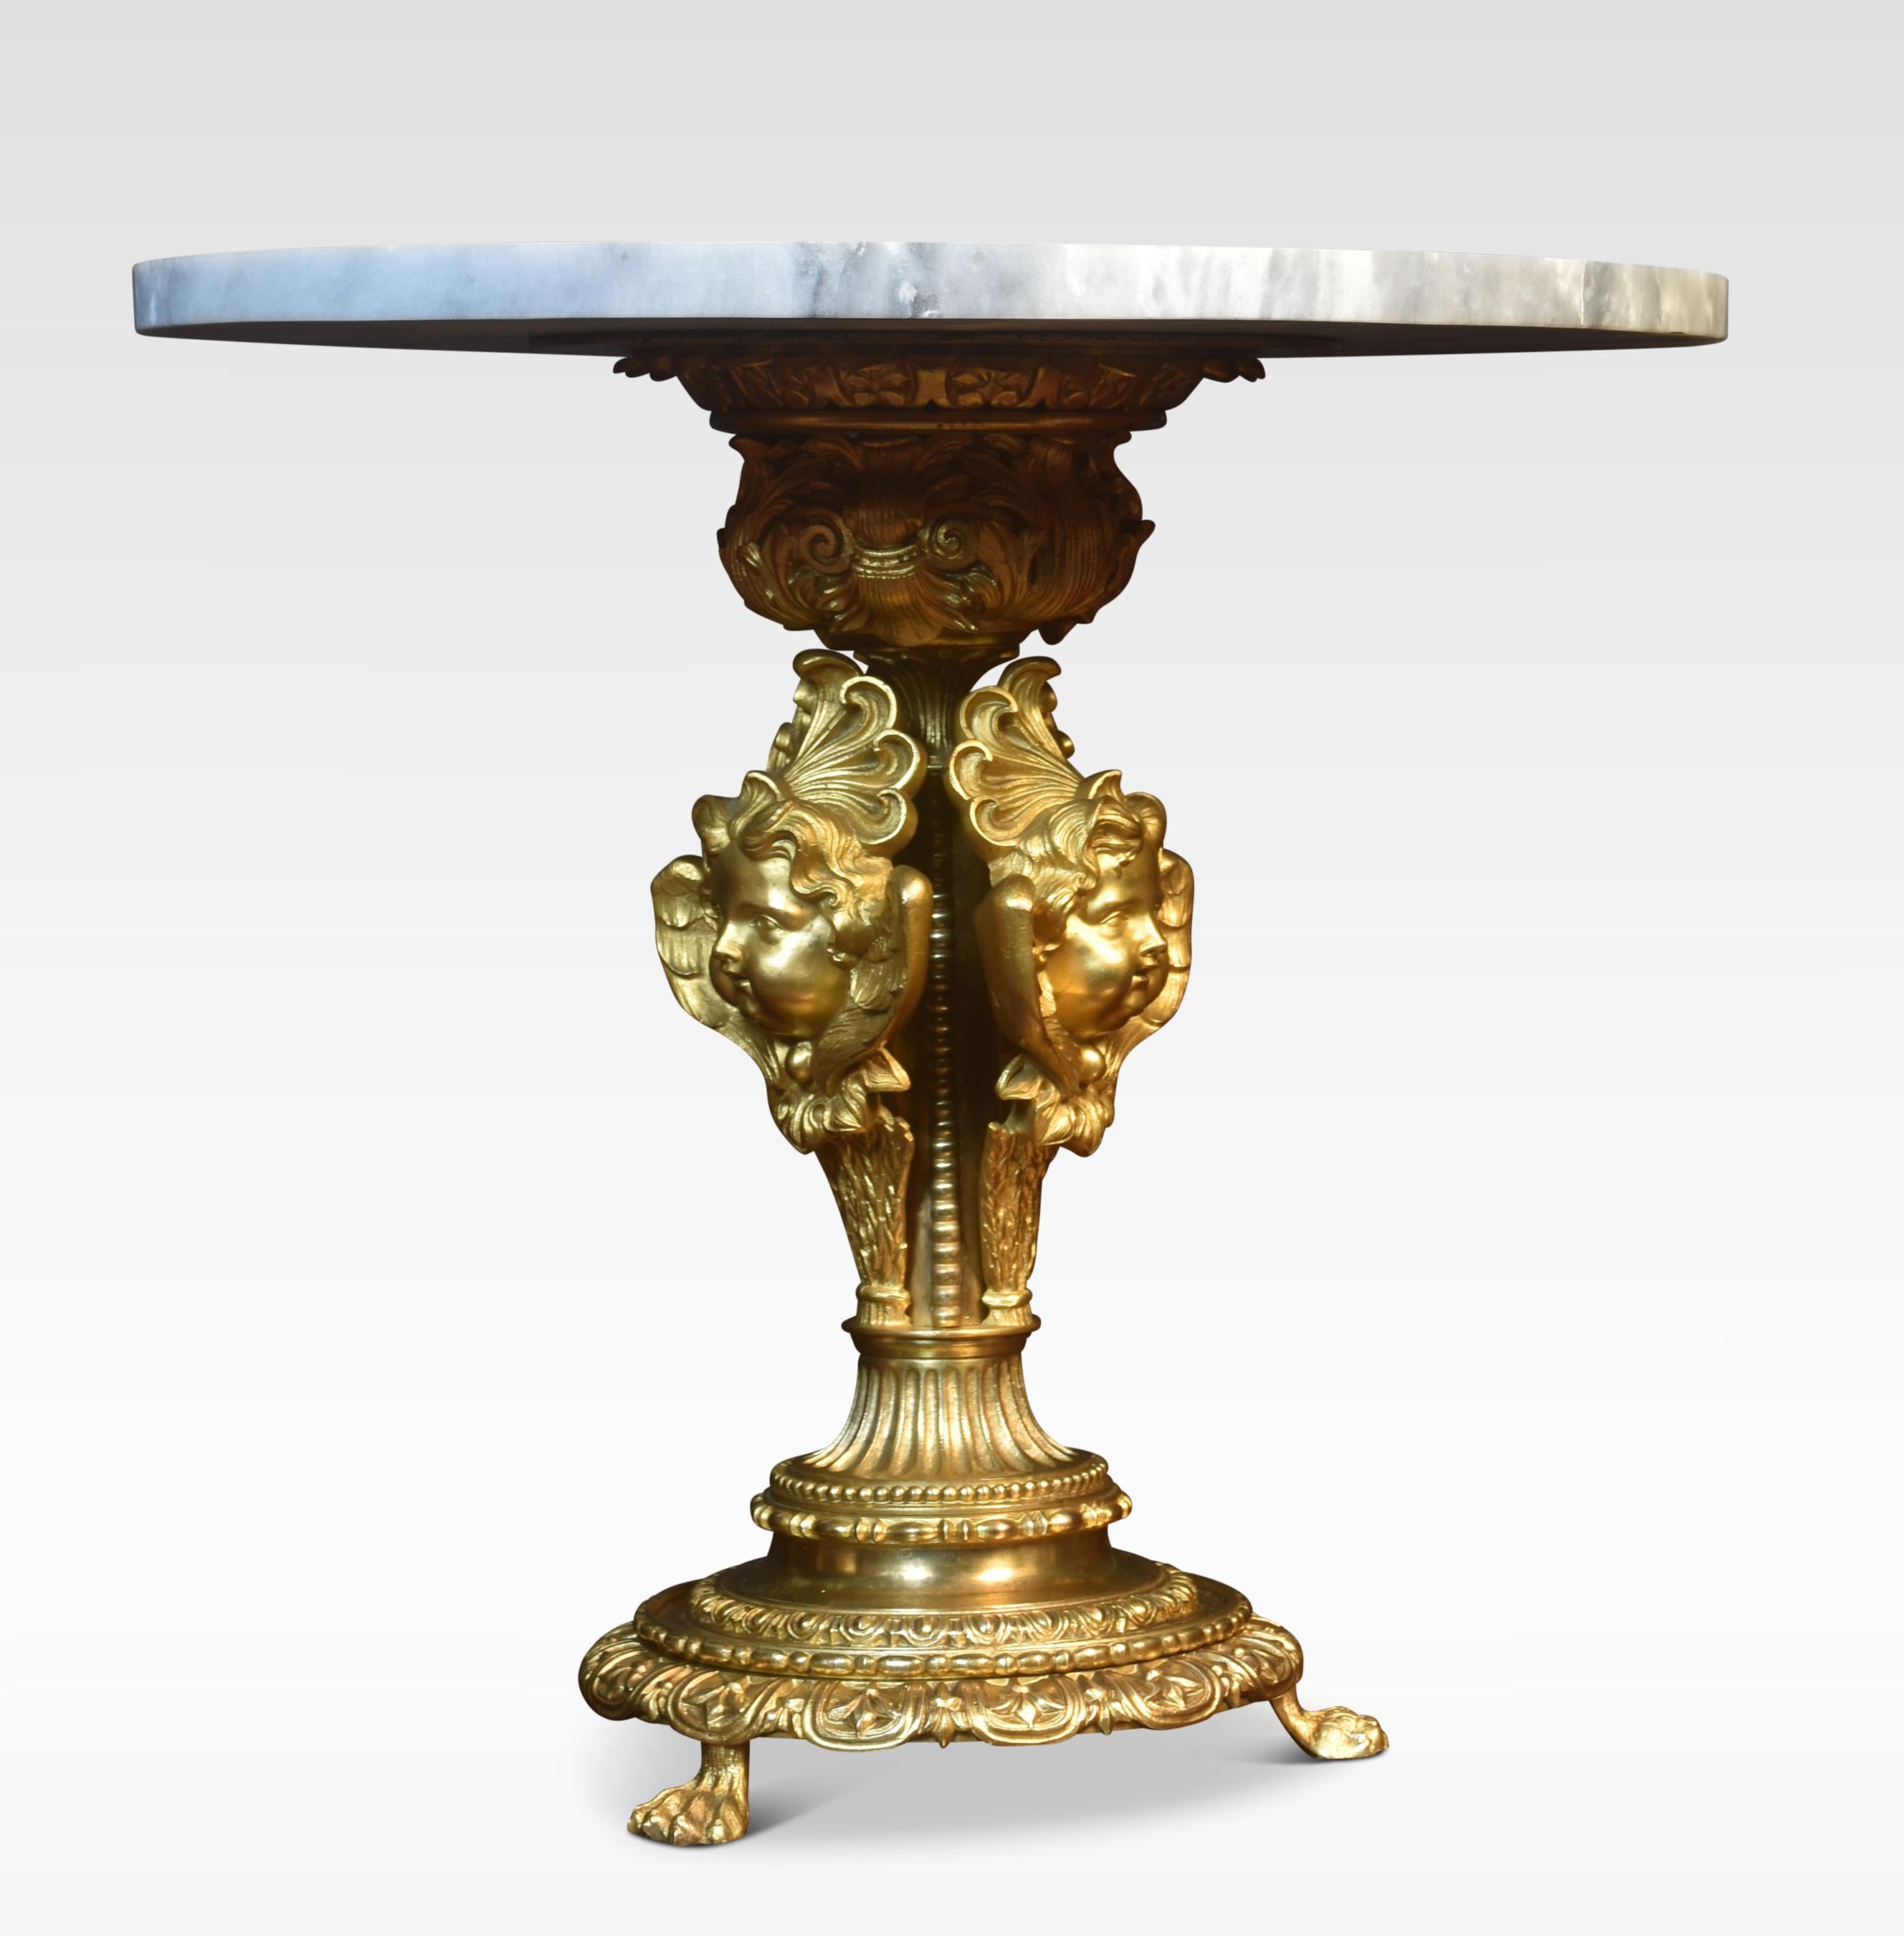 Late 19th century side table, the circular marble top raised on ornate cherub brass stand. All raised on three paw feet.
Dimensions
Height 18.5 Inches
Width 19.5 Inches
Depth 19.5 Inches